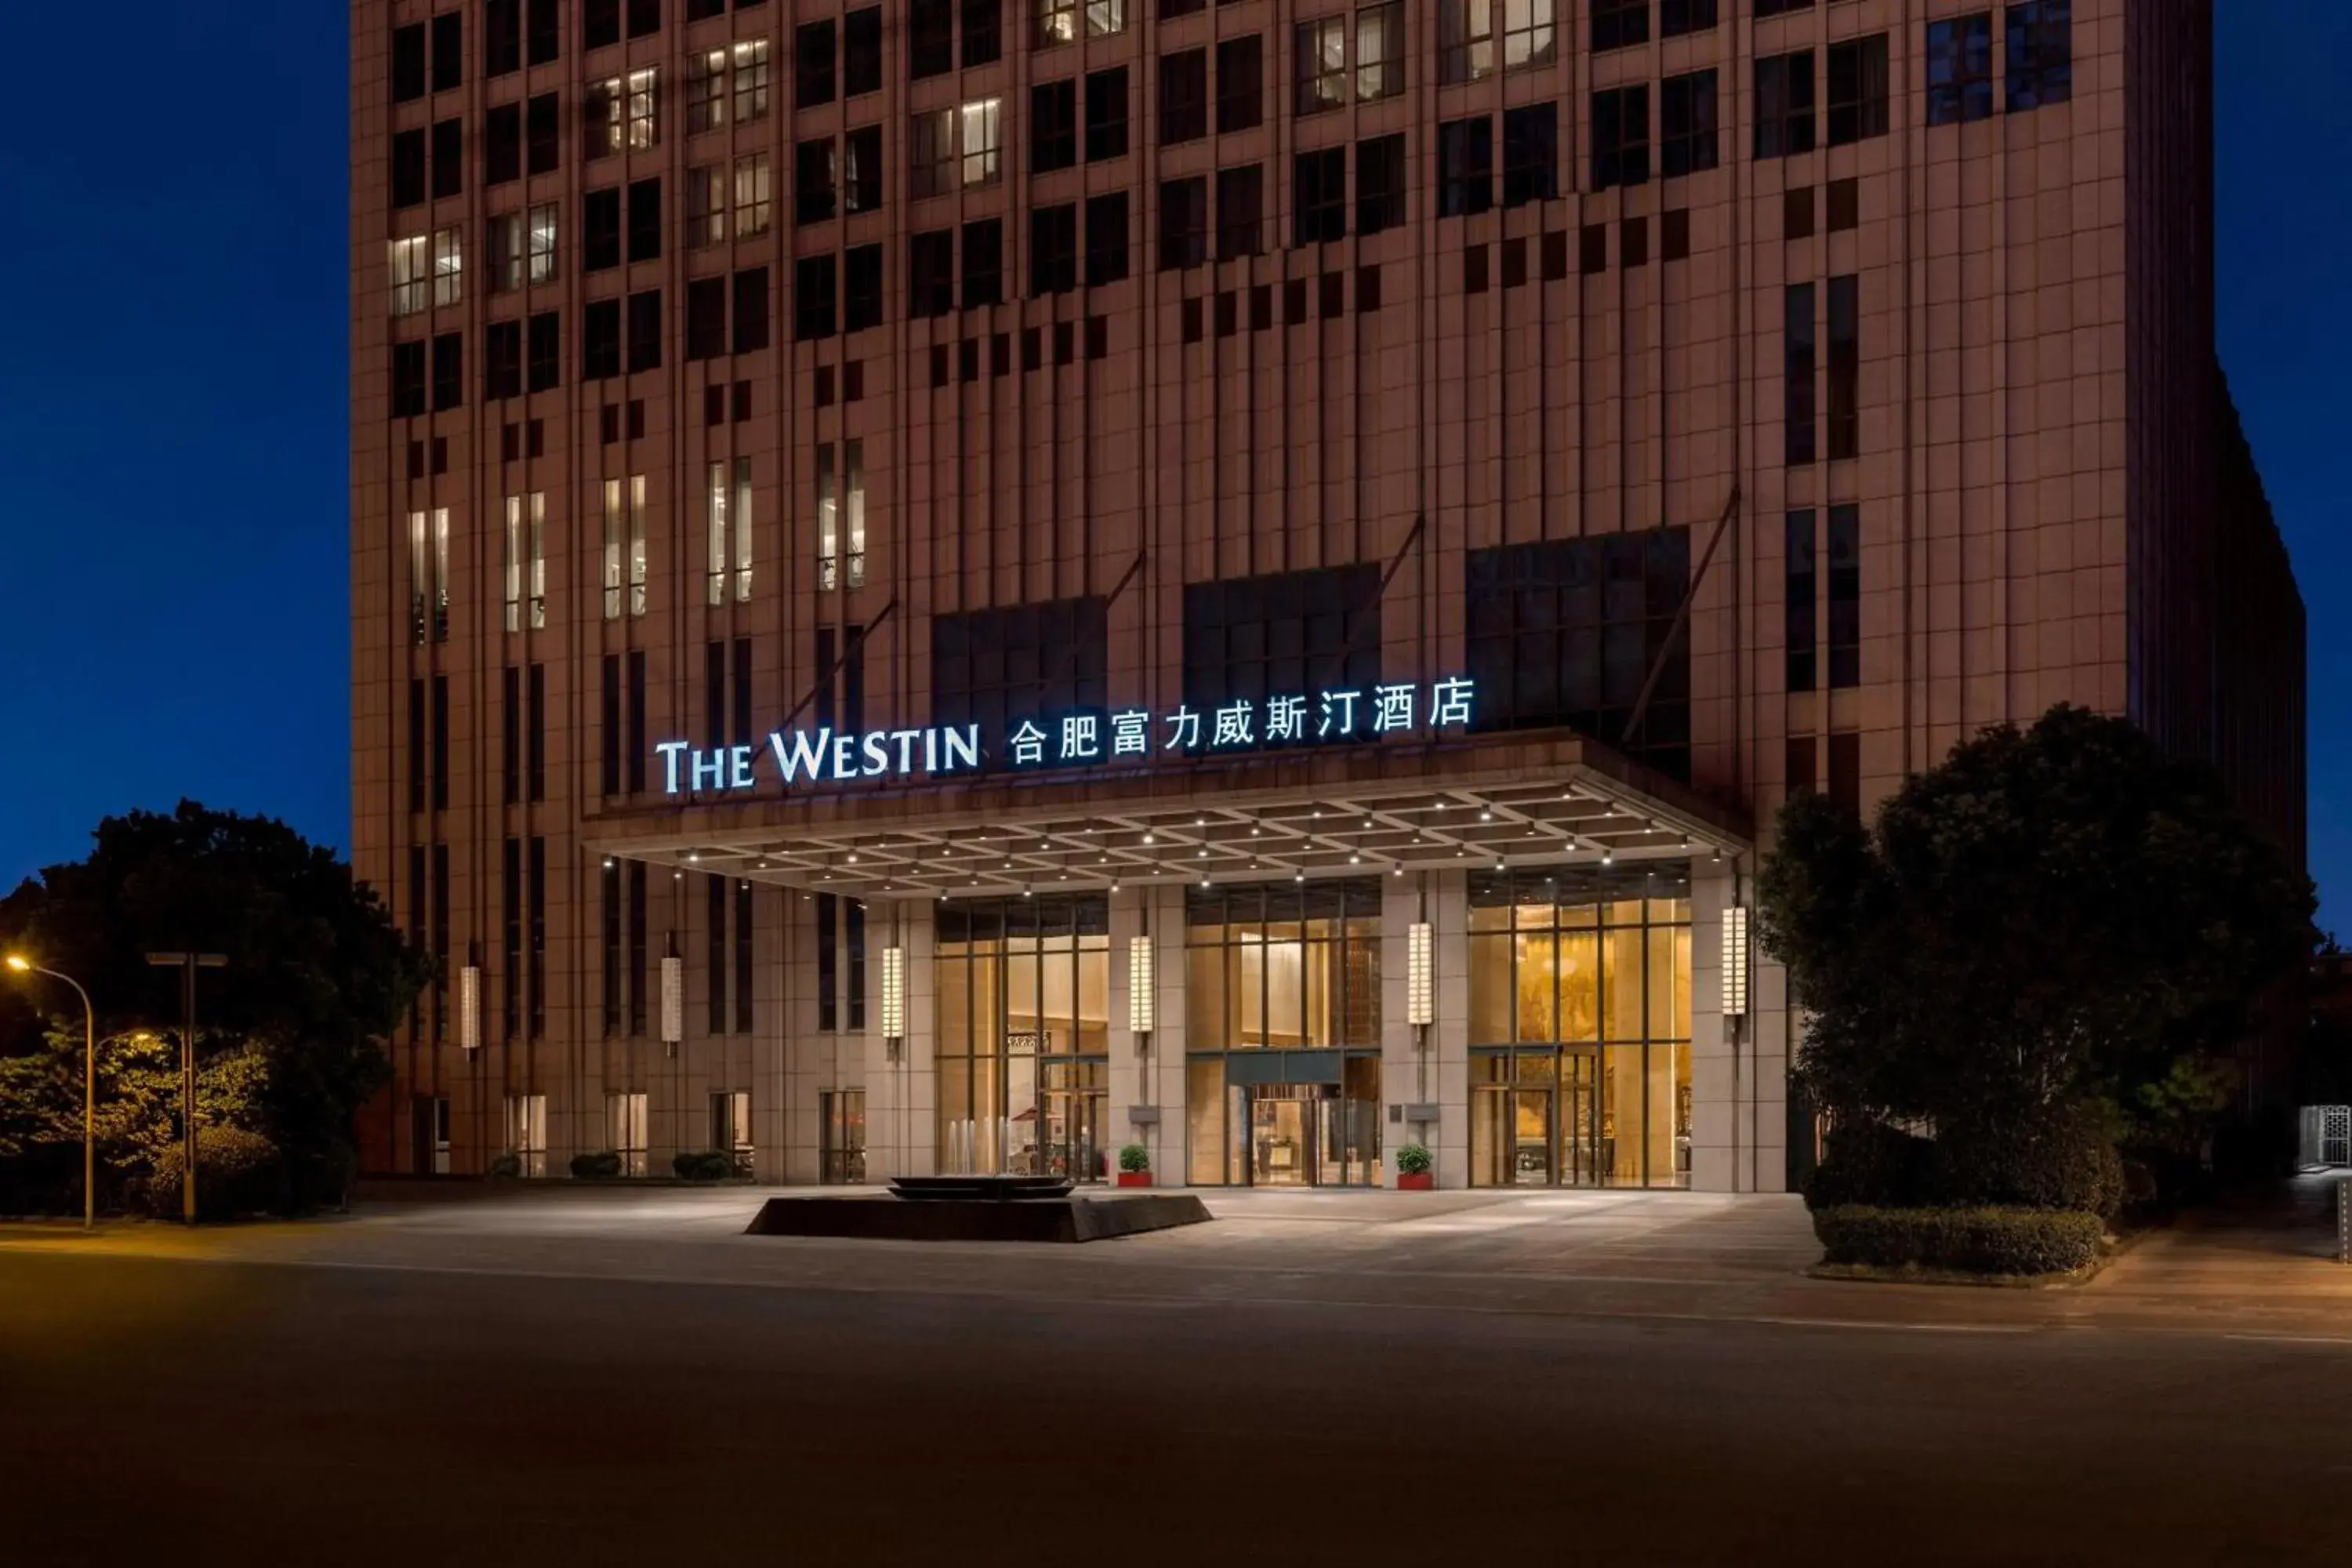 Property Building in The Westin Hefei Baohe